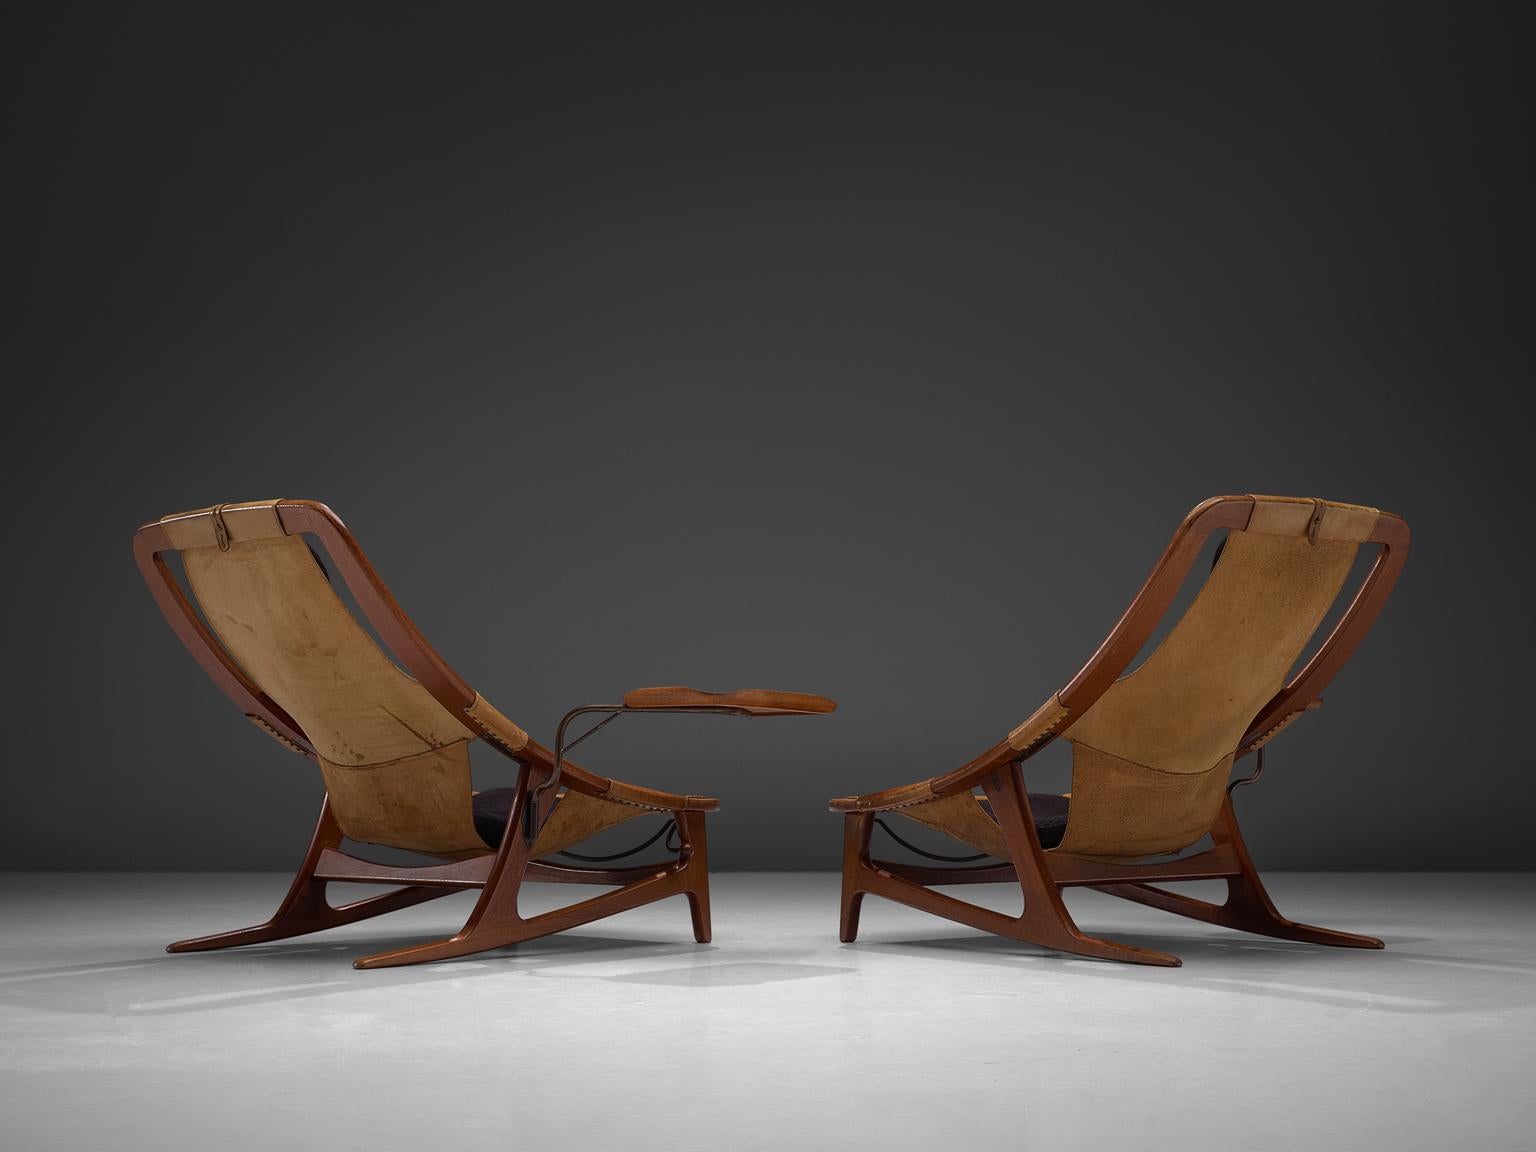 Arne F. Tidemand Ruud for Norcraft, set of 2 adjustable lounge chairs 'Holmenkollen', teak and cognac leather, Norway, 1959.

This very rare pair of easy chairs with adjustable serving tray is designed by Norwegian designer Arne F. Tidemand Ruud.